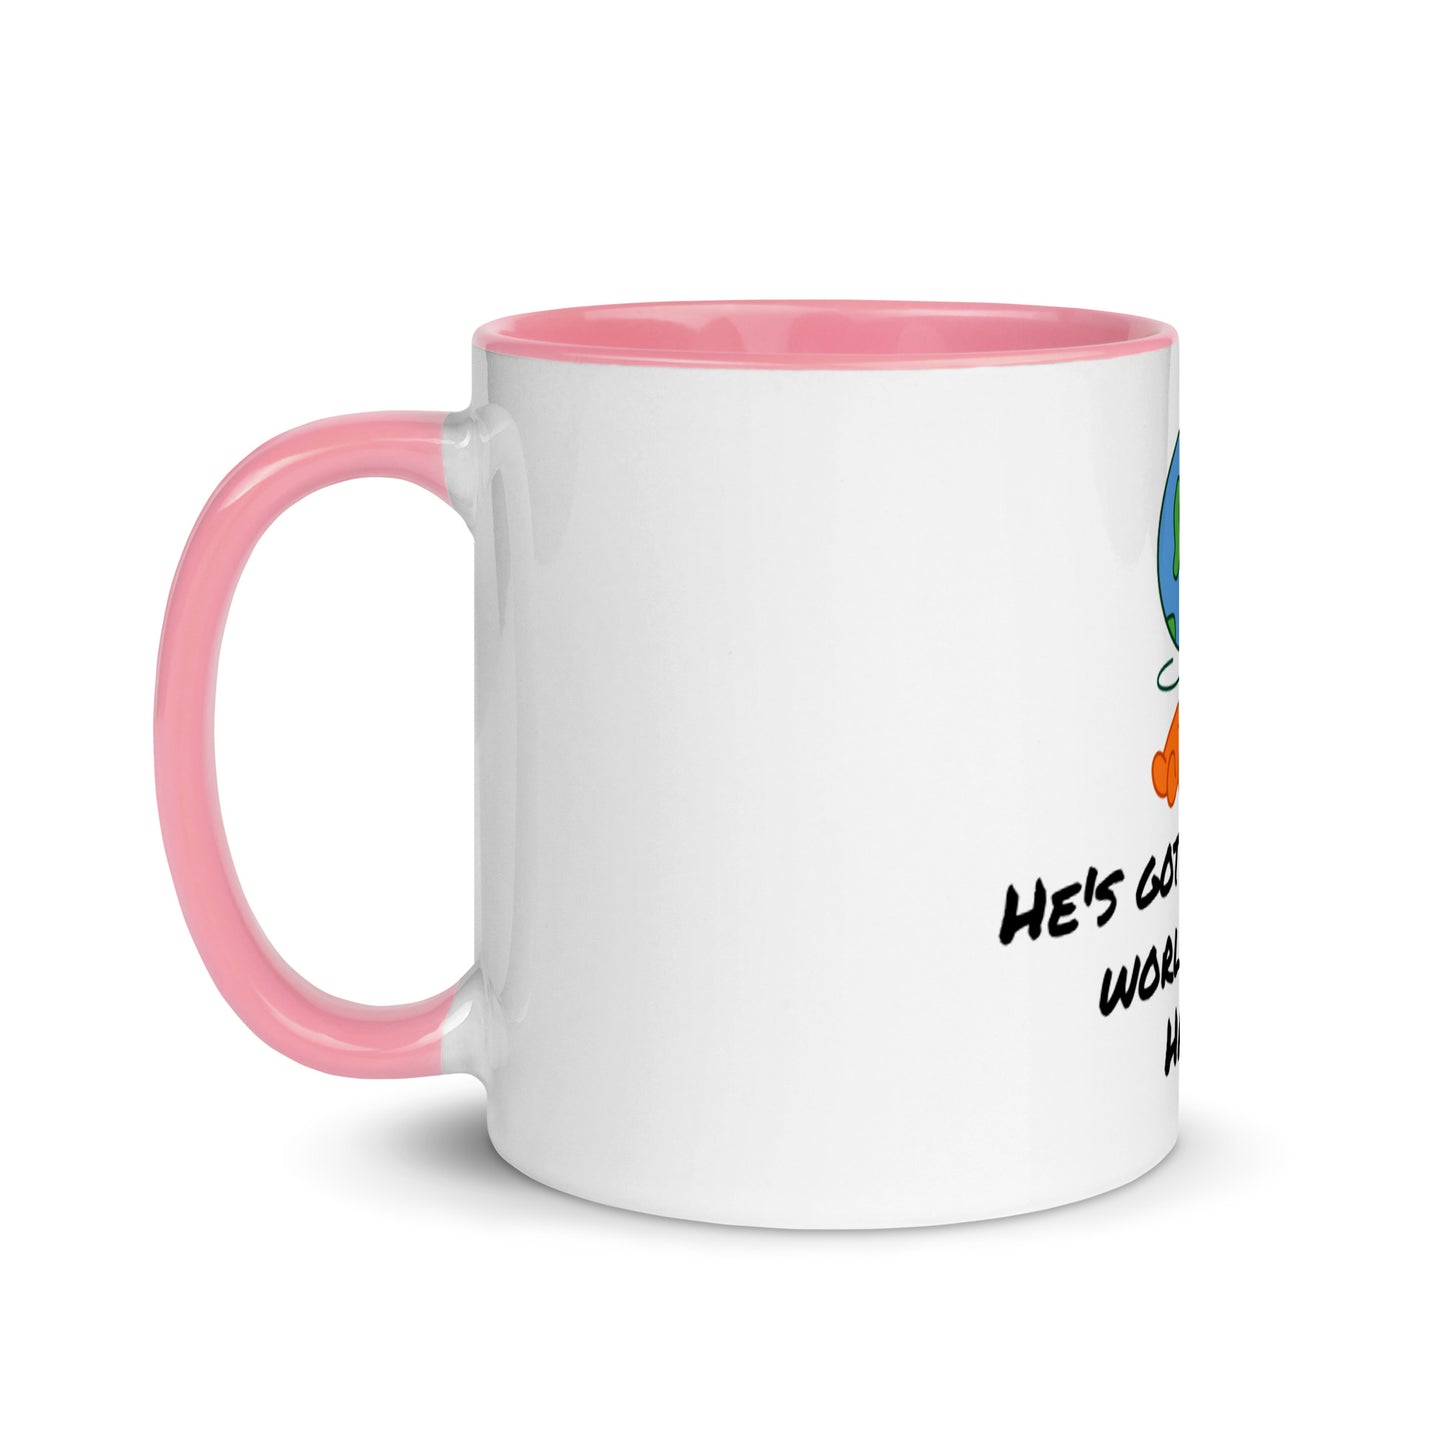 He's Got The Whole World In His Hands White Ceramic Mug with Color Inside